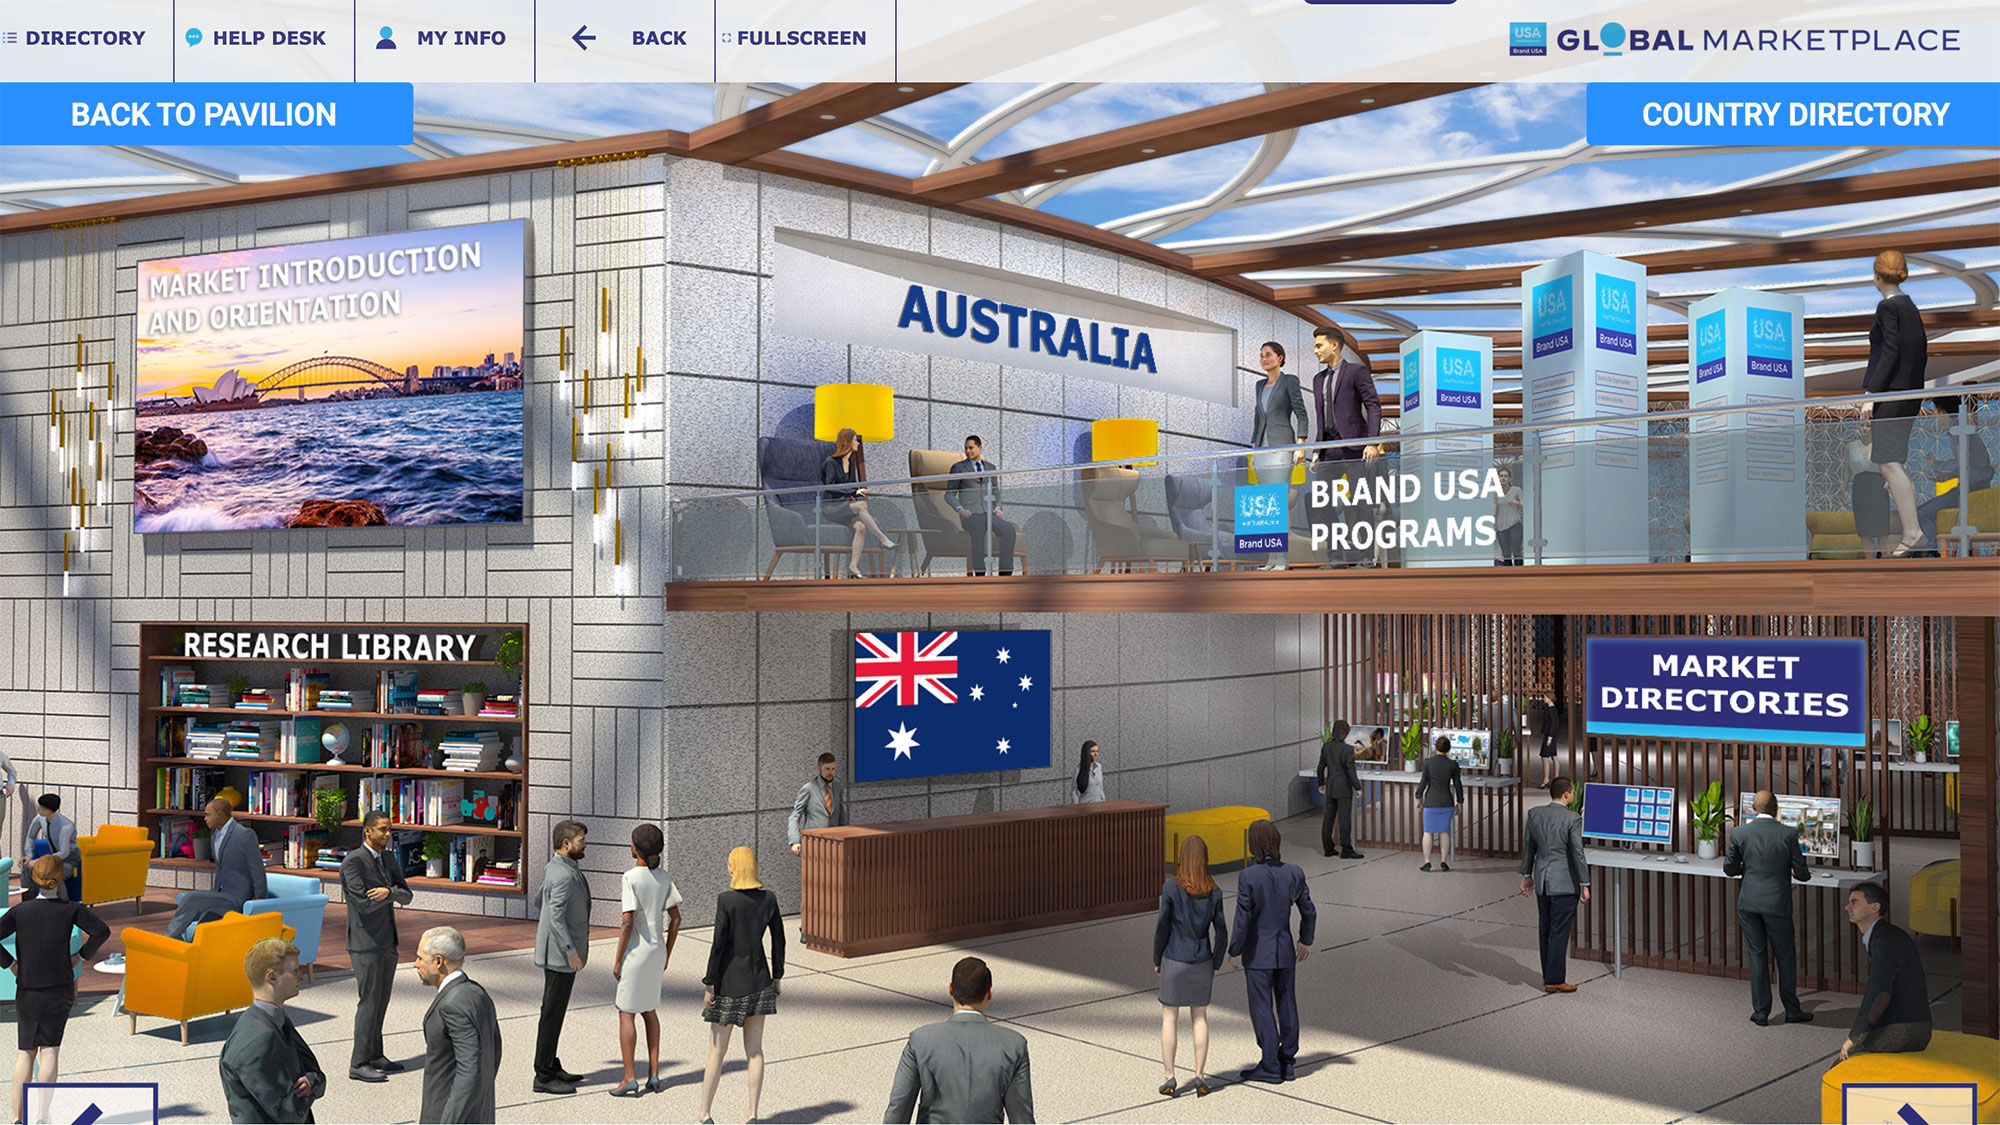 The destination "lounge" for Australia in the International Pavilion, part the Brand USA Global Marketplace.